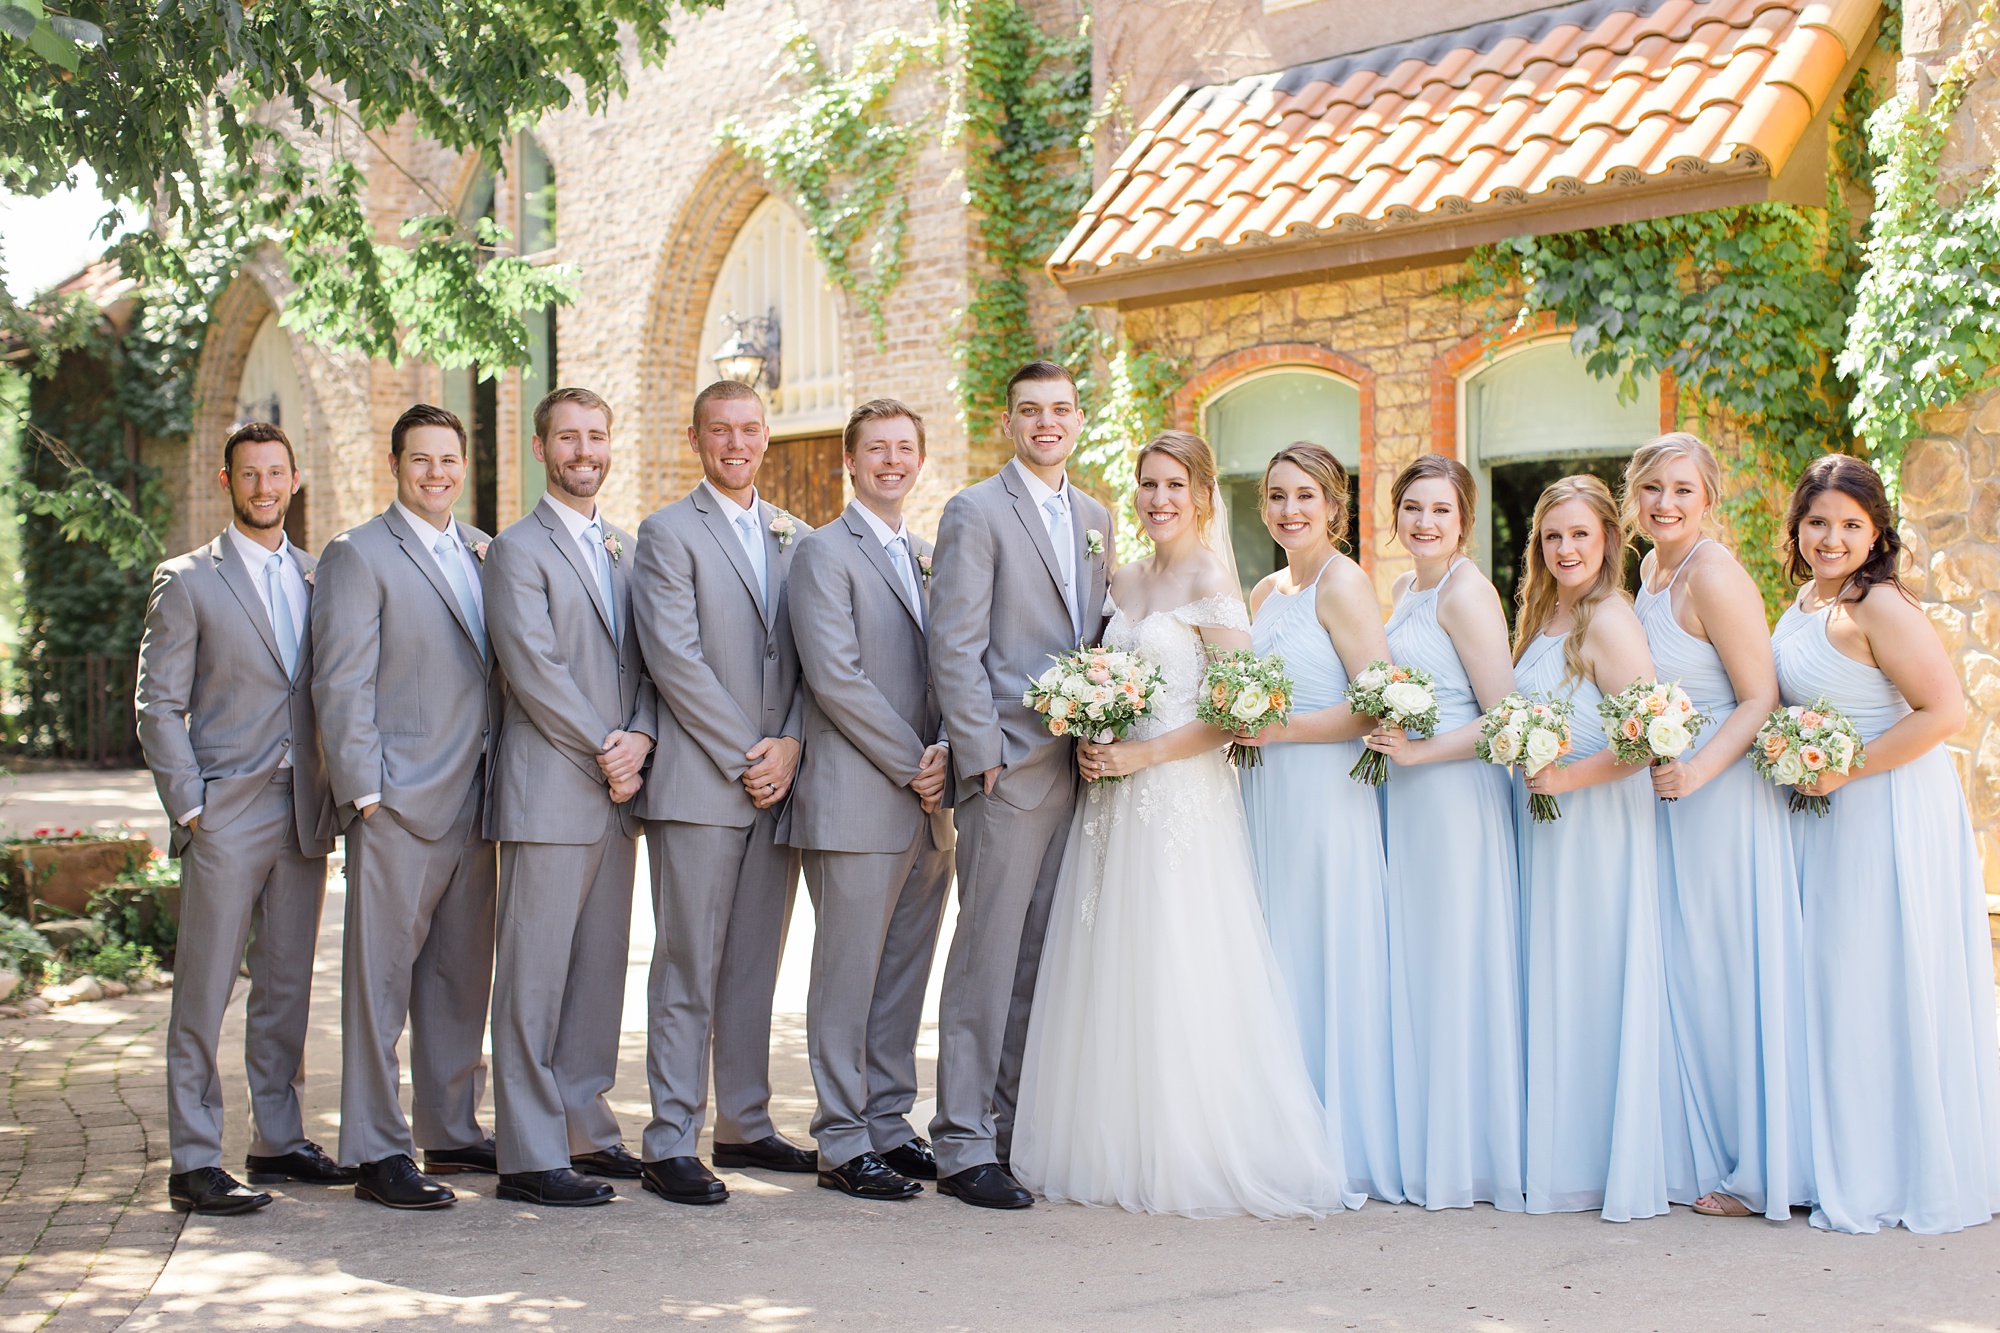 bride and groom pose with wedding party in light blue dresses and grey suits